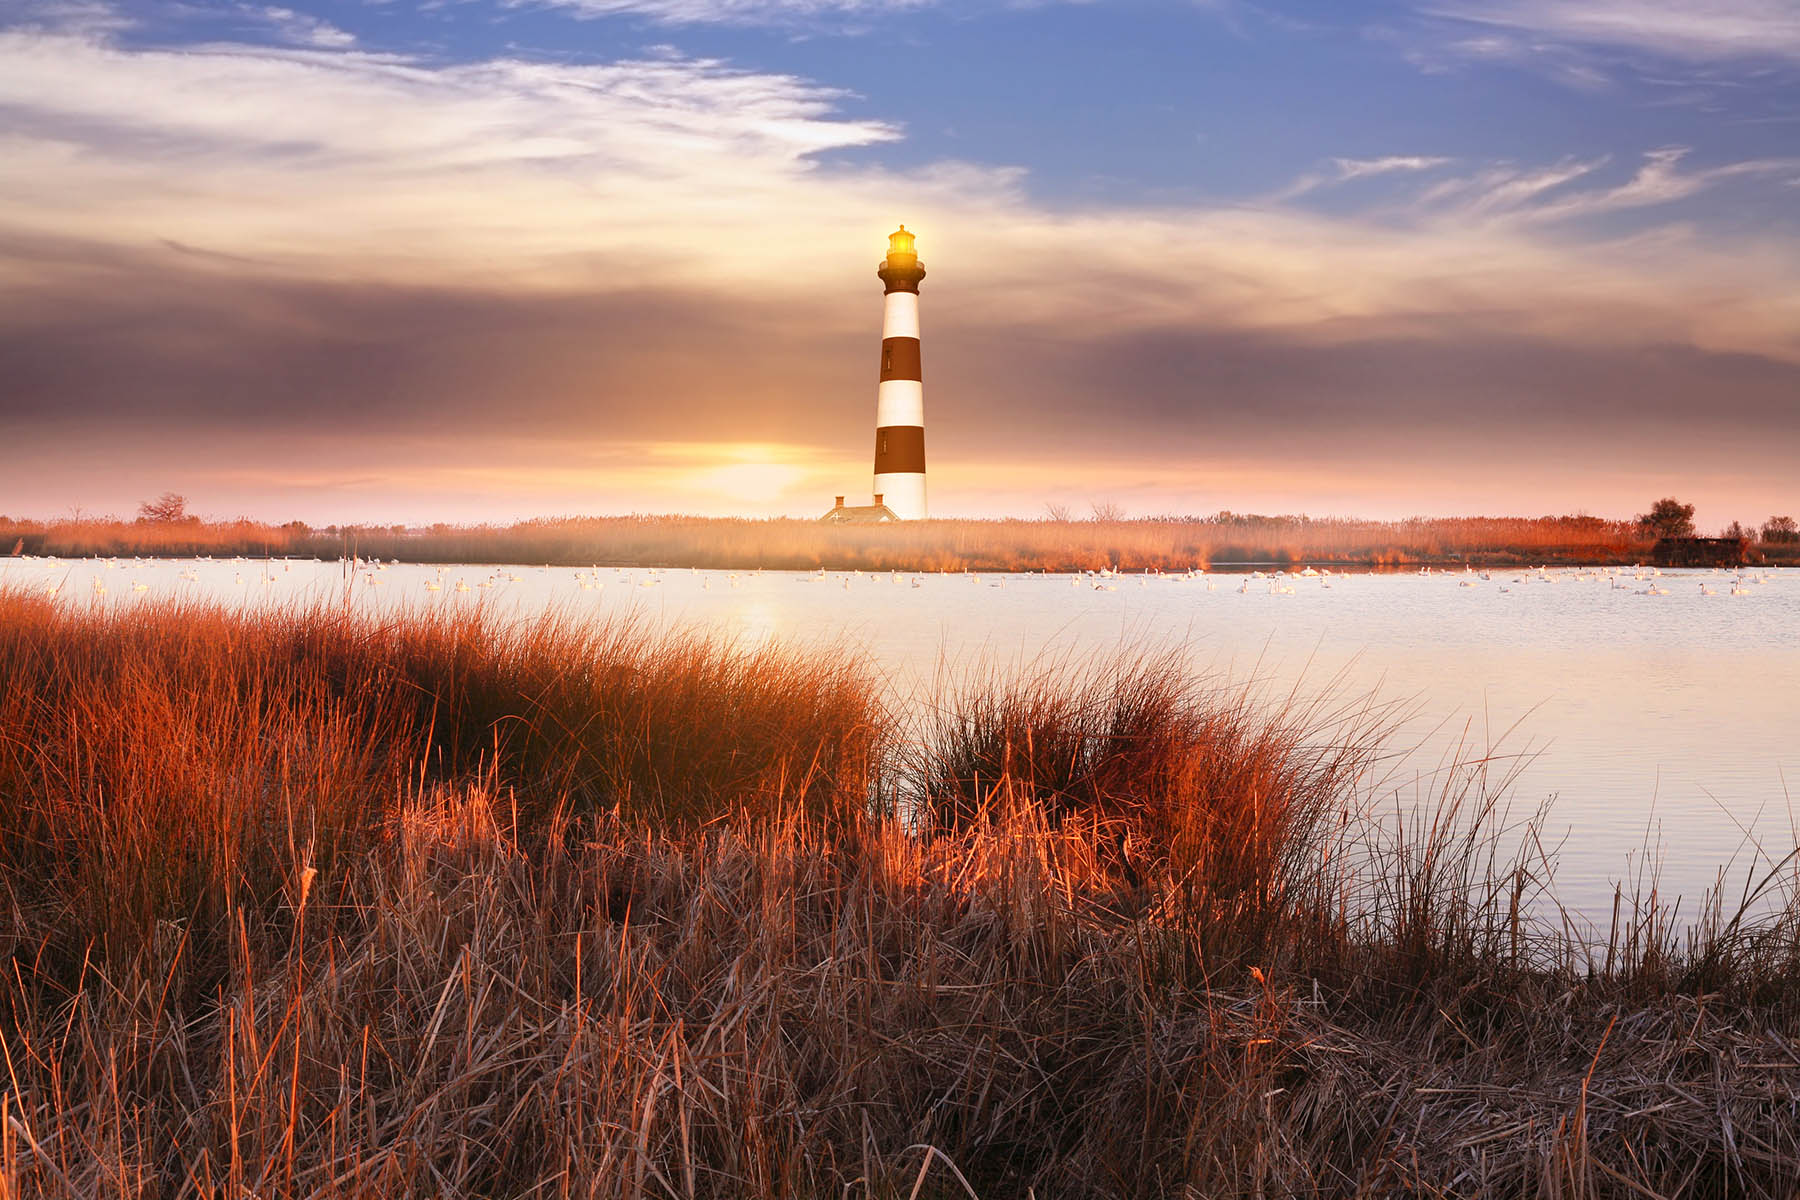 A Photographer’s Guide to Capturing the Beauty of the Outer Banks